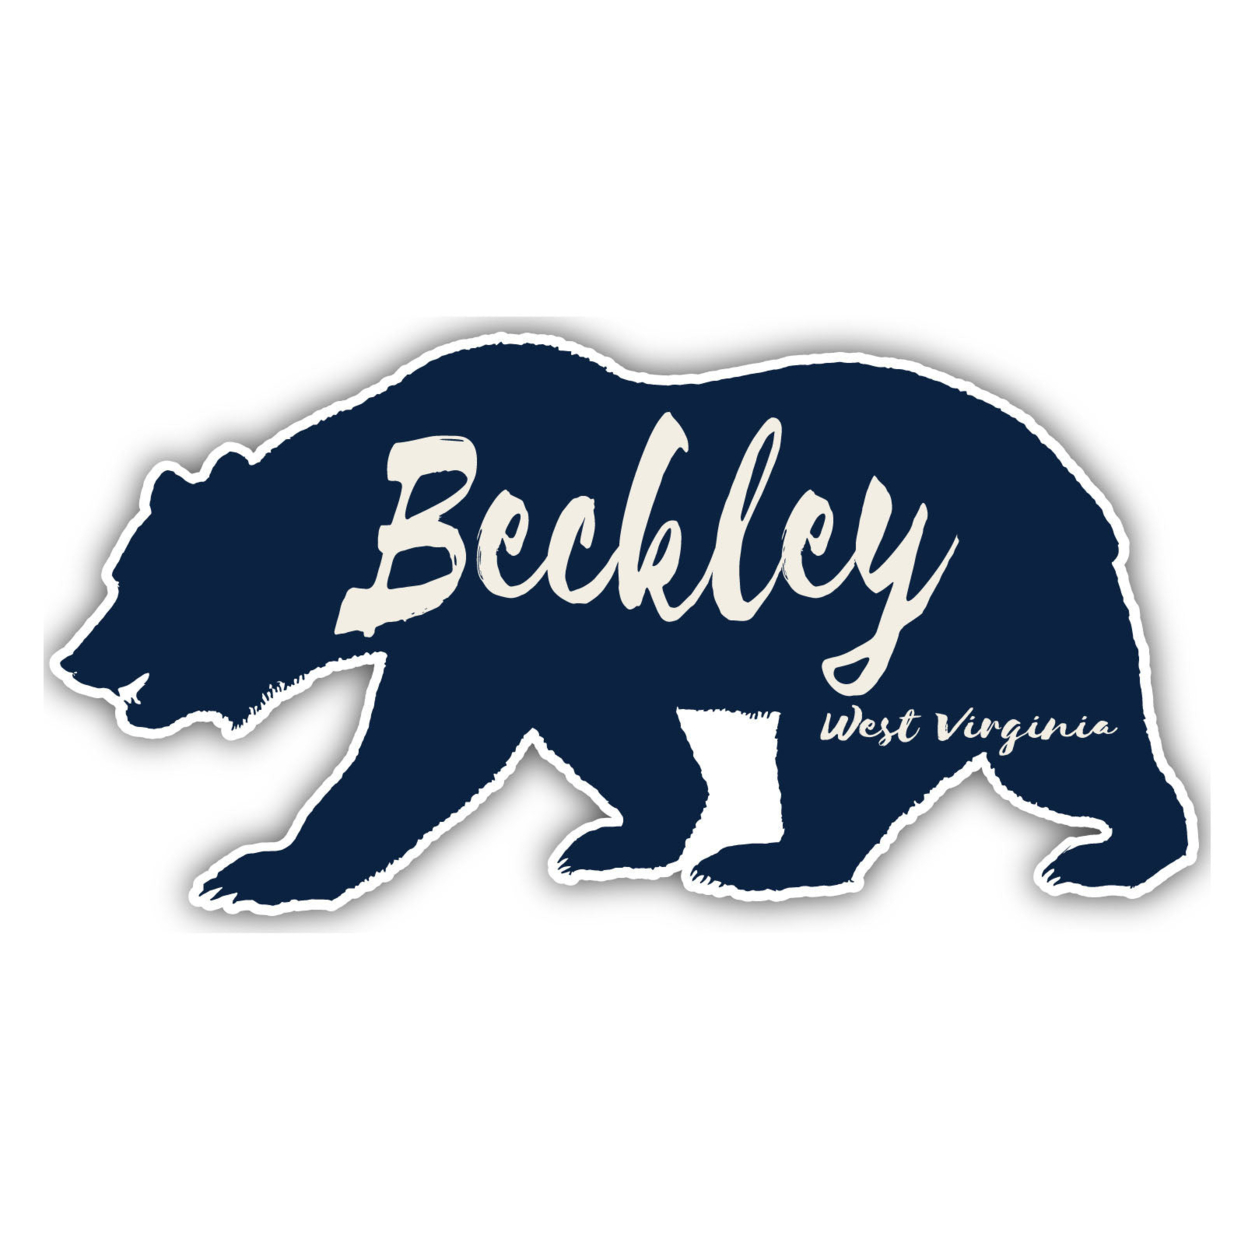 Beckley West Virginia Souvenir Decorative Stickers (Choose Theme And Size) - 4-Pack, 8-Inch, Tent